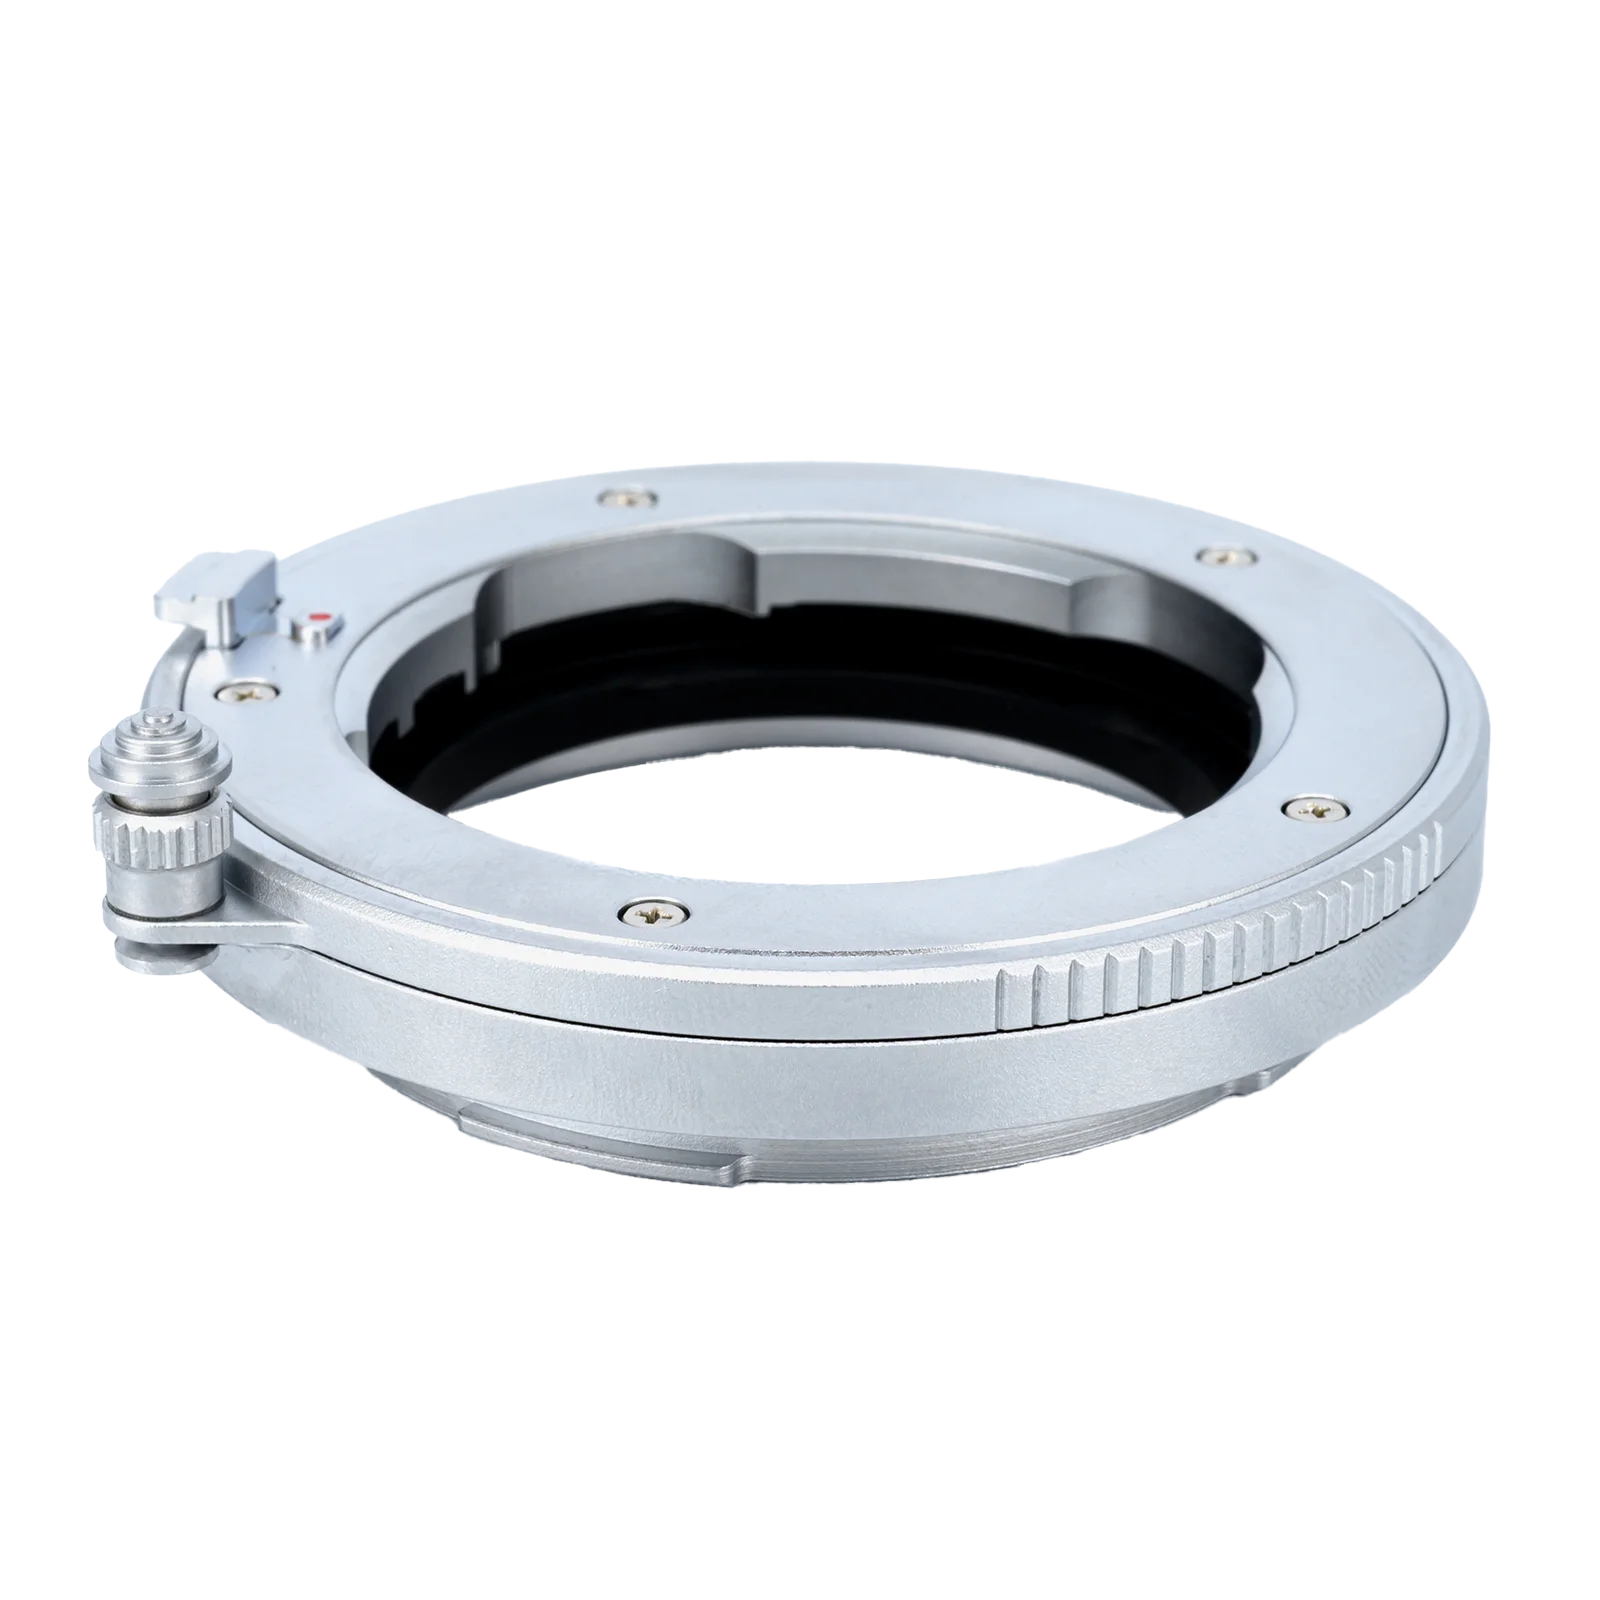 

Lens Adapter Helicoid Leica M Lens to Leica L SL CL Macro Focu cameras accessories Made of brass and aluminum Silver